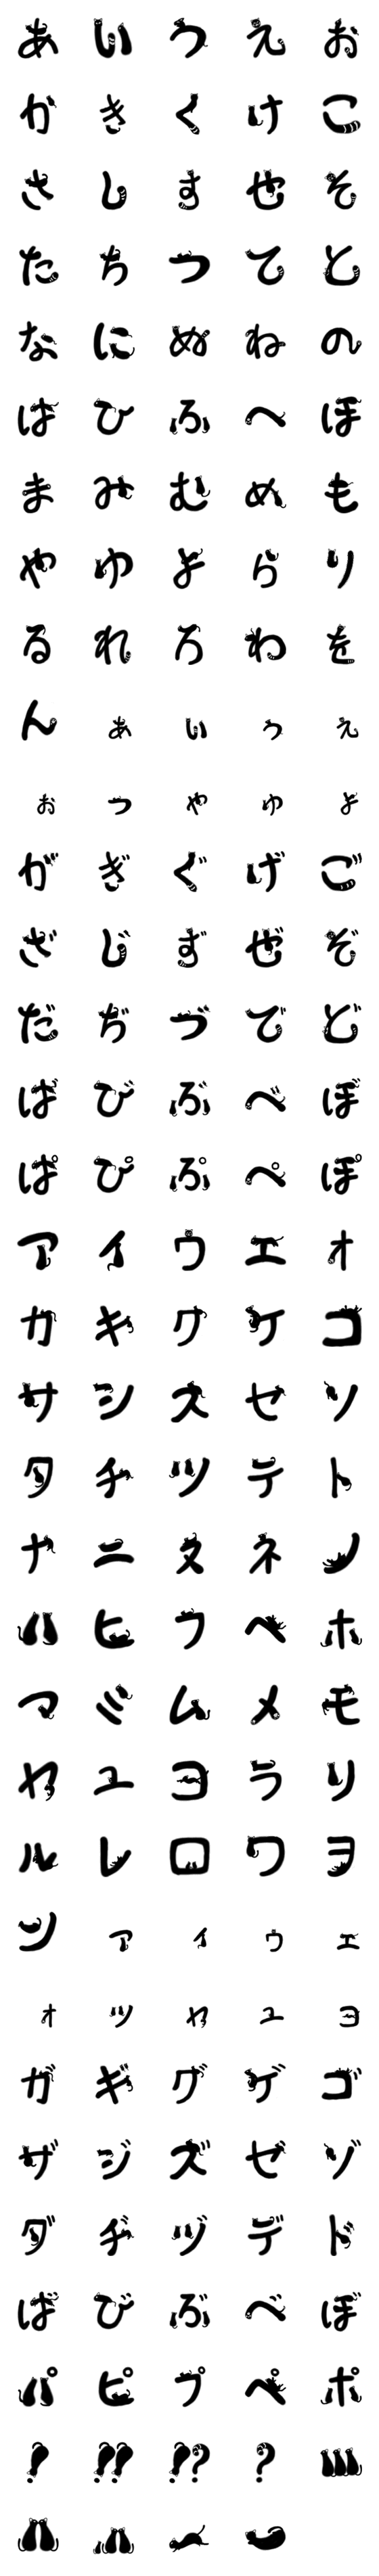 [LINE絵文字]猫付きの絵文字の画像一覧